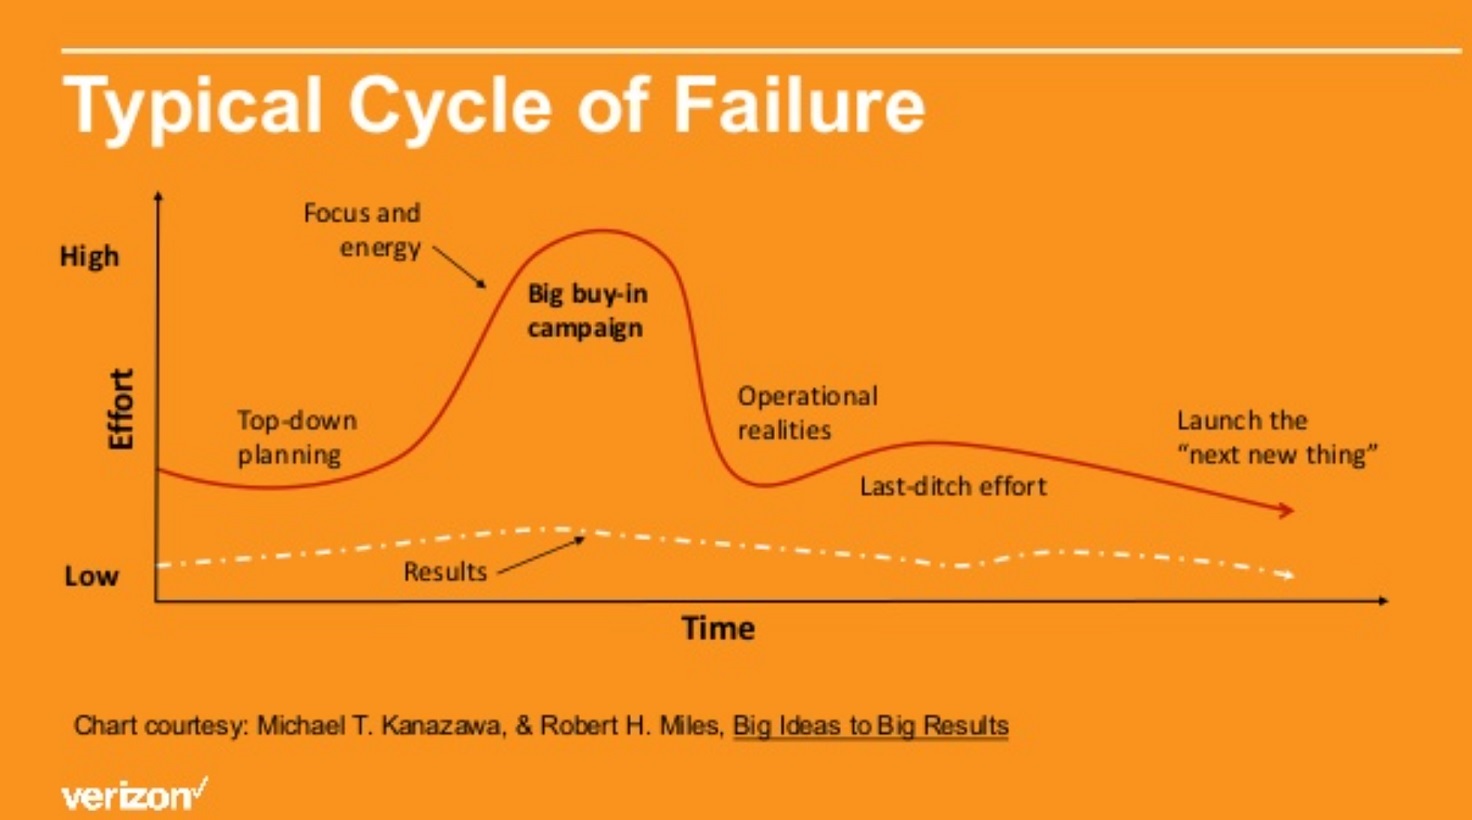 Lisa Trager's Typical Cycle of Failure